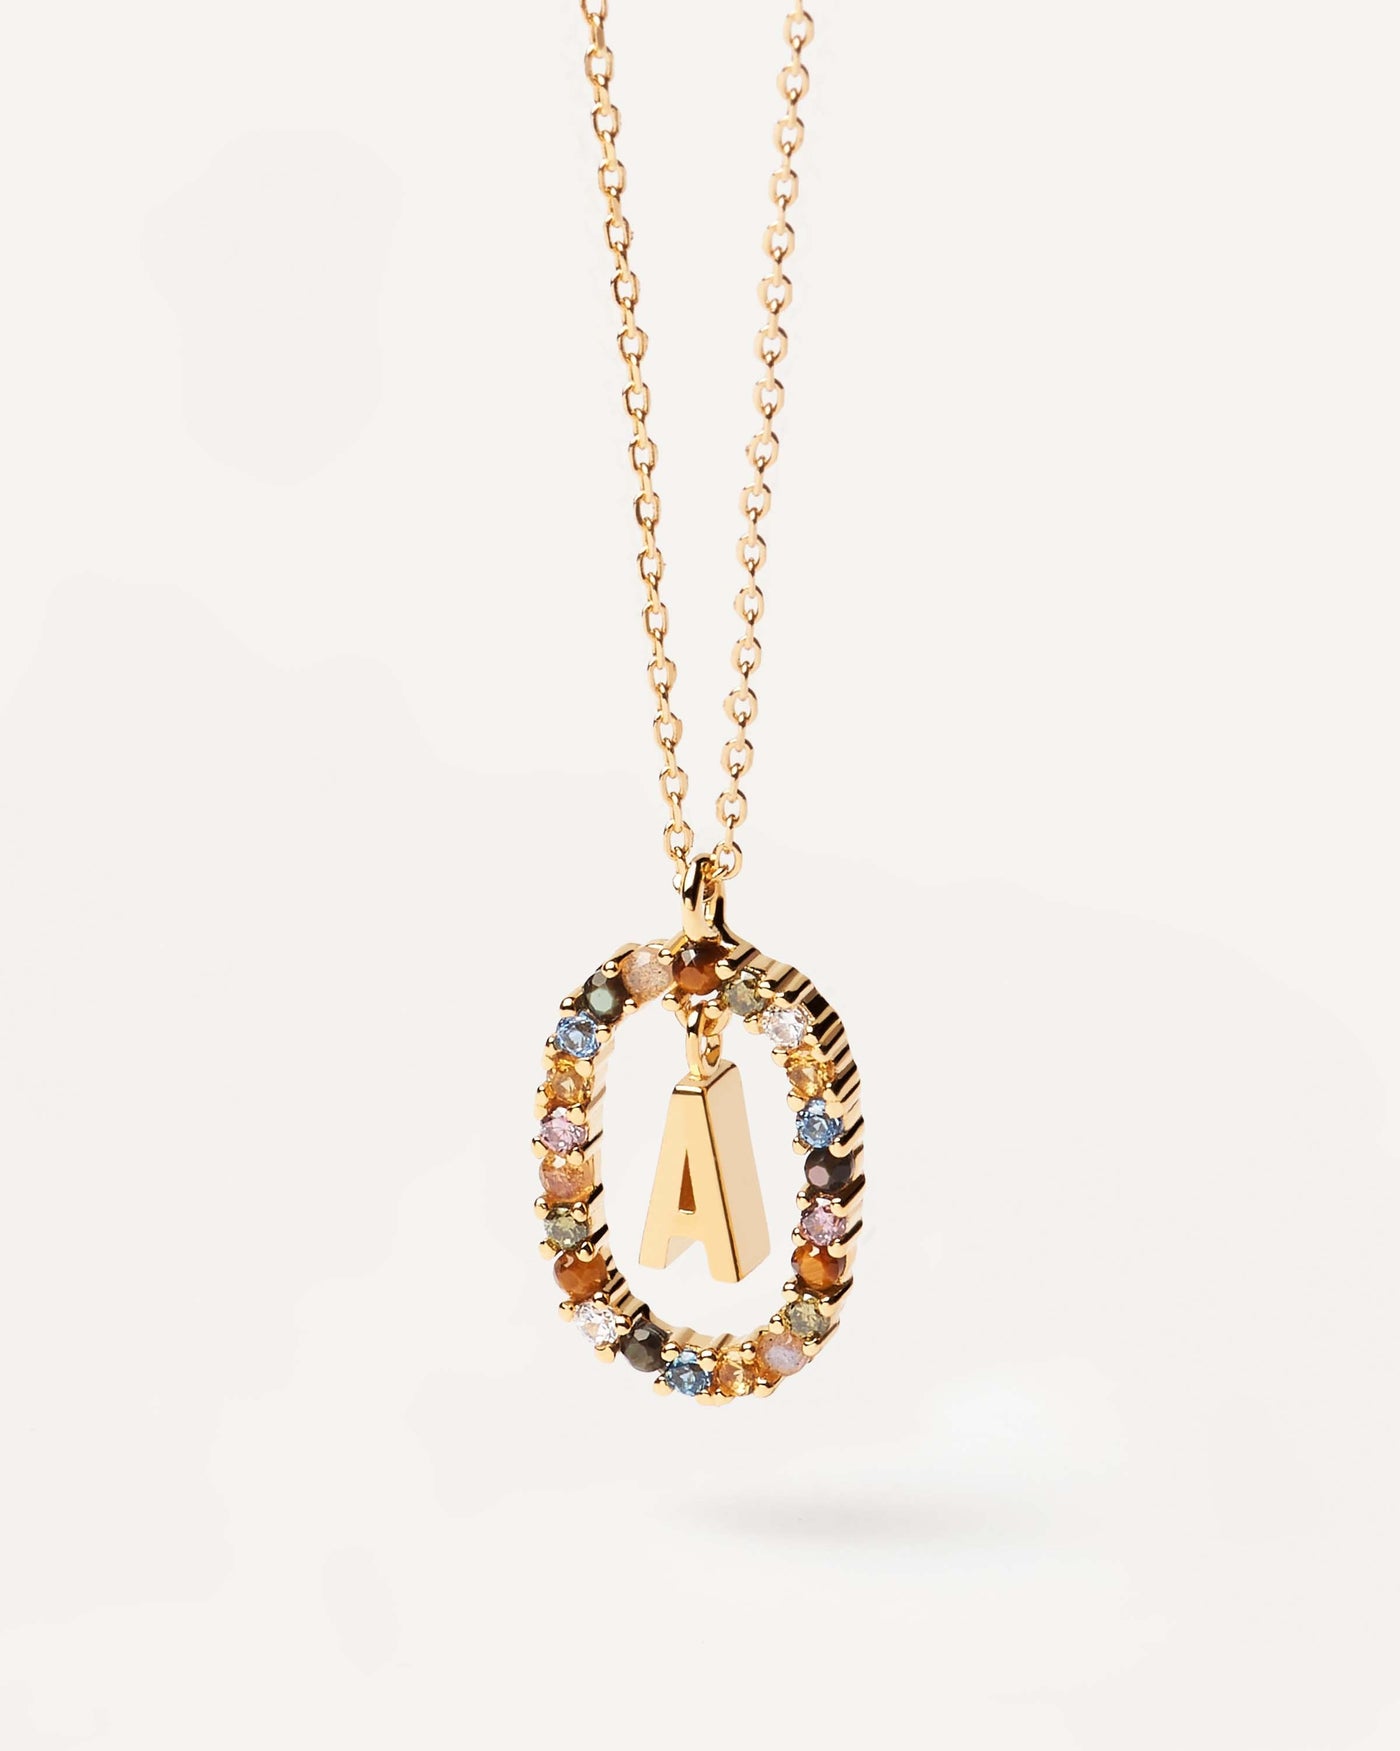 2023 Selection | Letter A necklace. Initial A necklace in gold-plated silver, circled by colorful gemstones. Get the latest arrival from PDPAOLA. Place your order safely and get this Best Seller. Free Shipping.